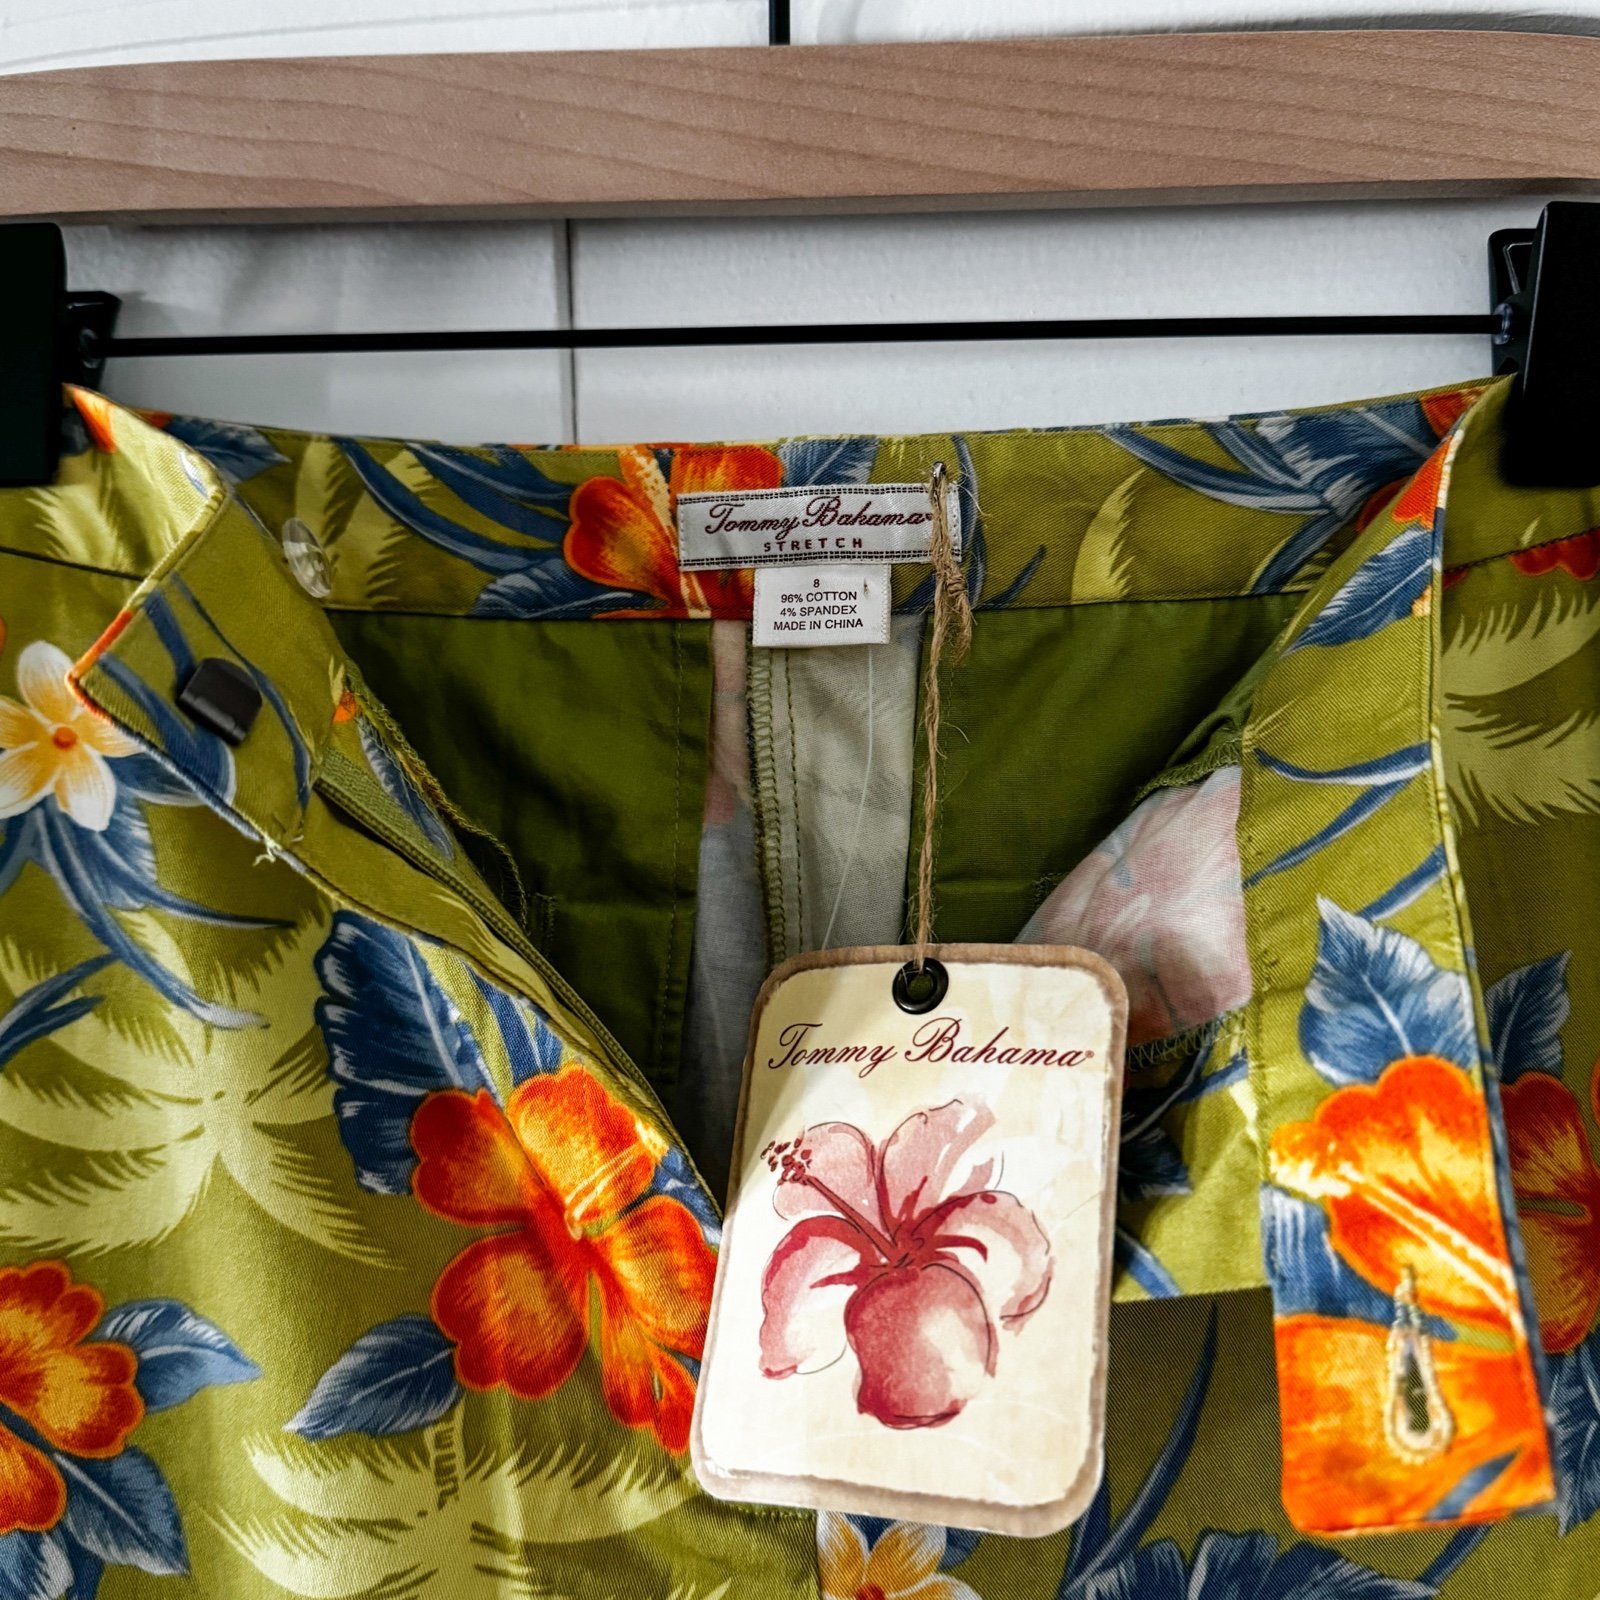 High quality NWT Tommy Bahama Tropical  Crop Ankle Pant pIMeoM94R US Sale